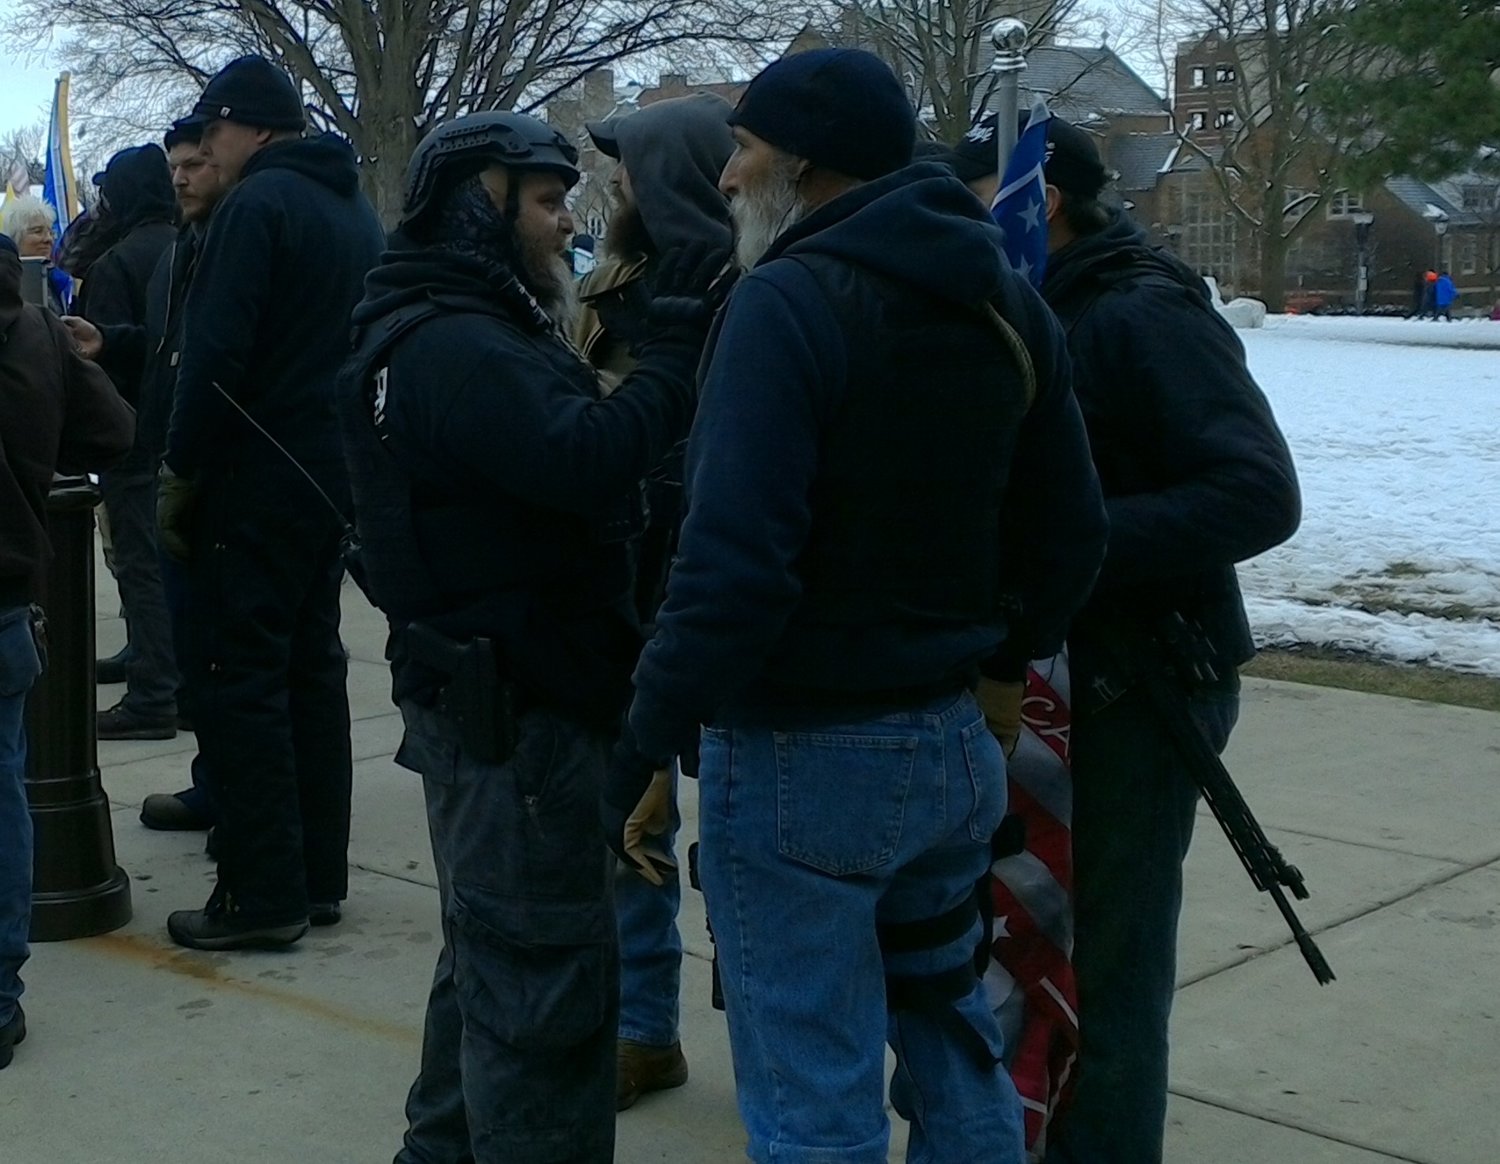 Phil Robinson, leader of the Michigan Liberty Militia, speaks with other Militia members at the Michigan Capitol on Wednesday during a pro-Trump rally and protest.